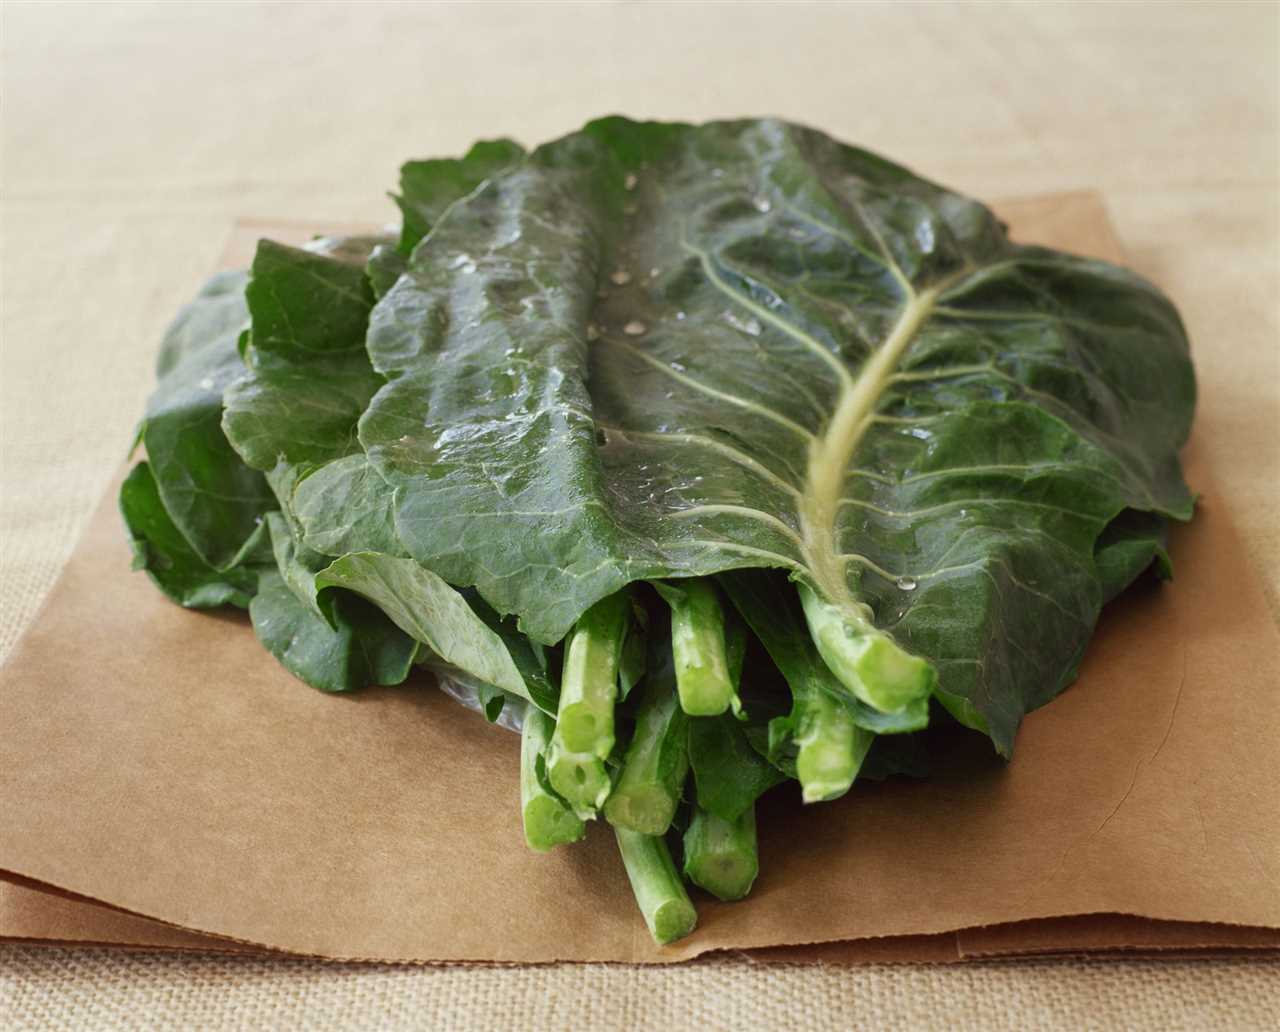 Mustard Greens Variety: Choosing the Best Greens for Your Bearded Dragon's Diet